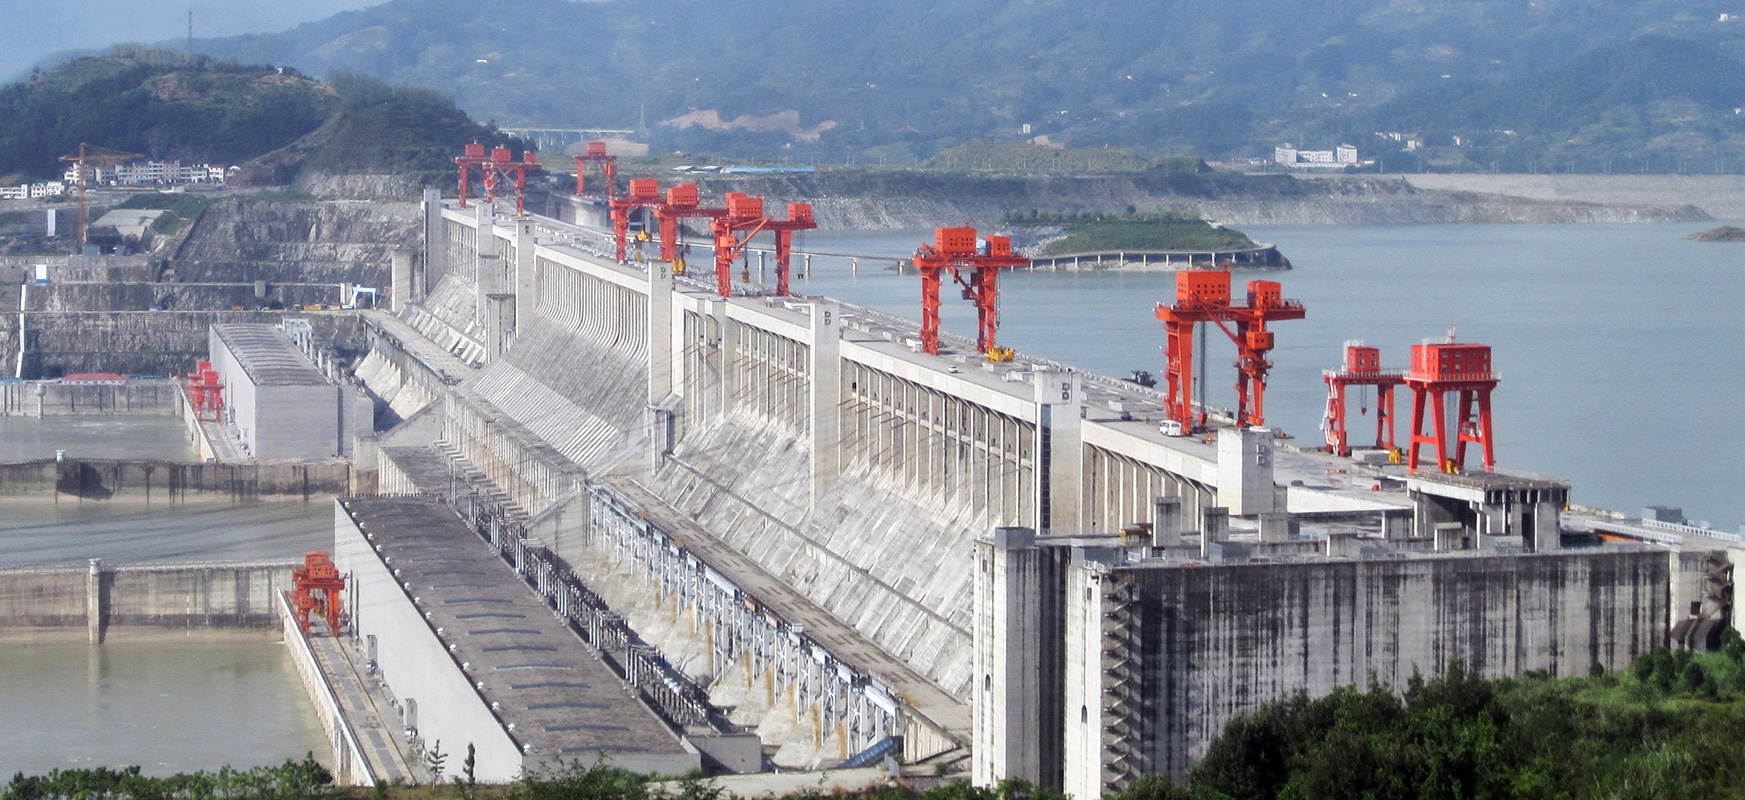 The Chinese Three Dam was deformed as a result of record